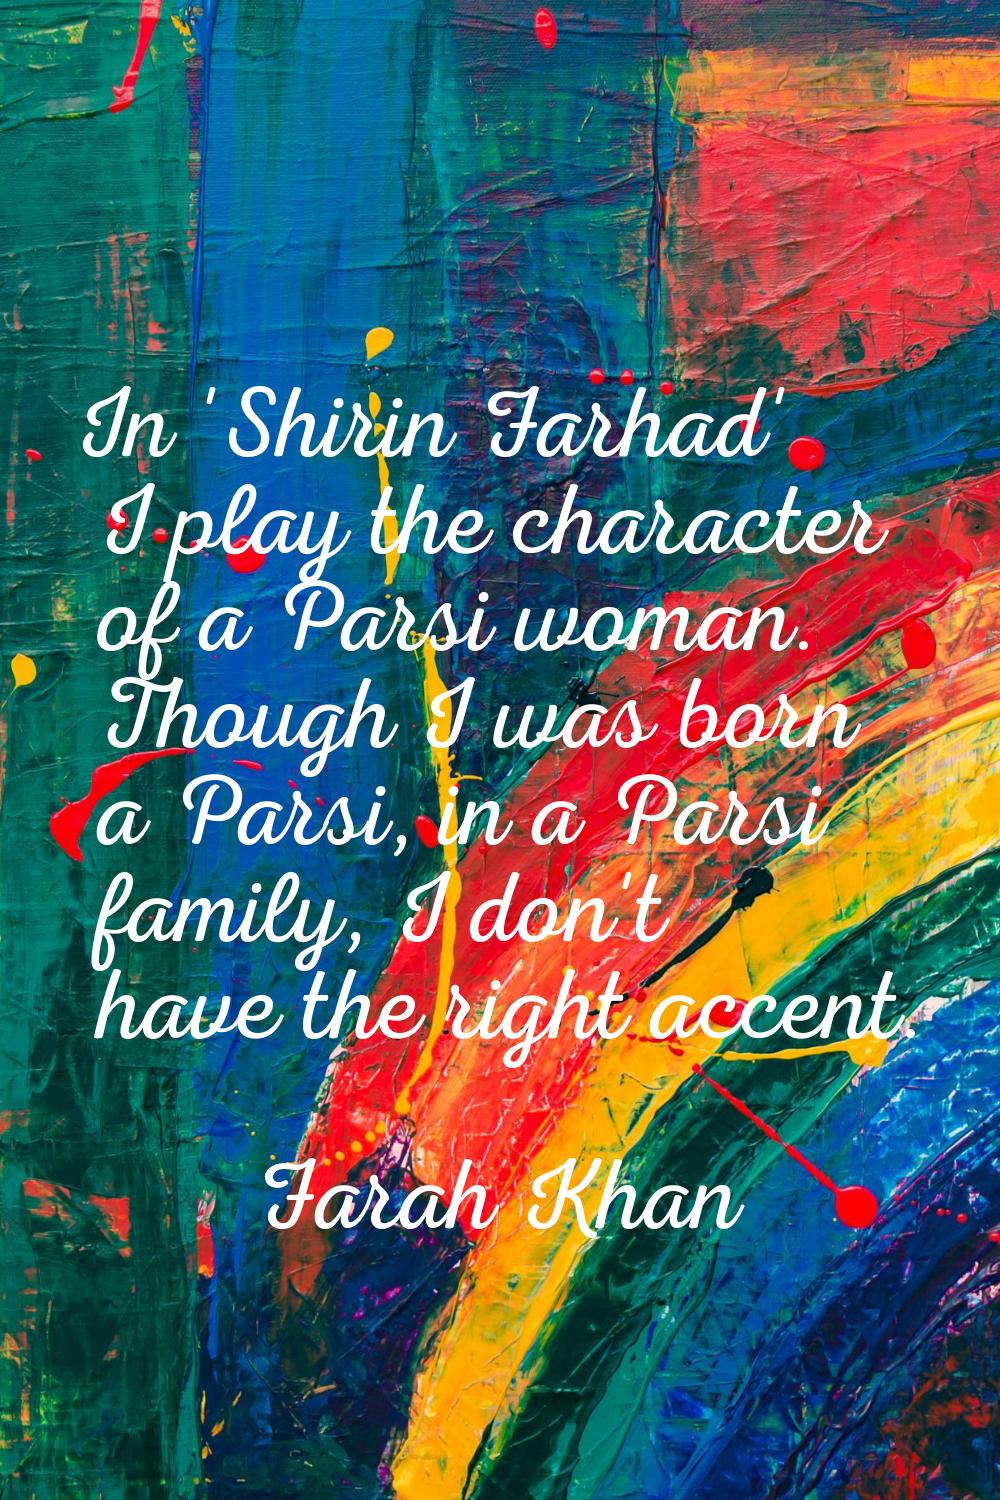 In 'Shirin Farhad' I play the character of a Parsi woman. Though I was born a Parsi, in a Parsi fam